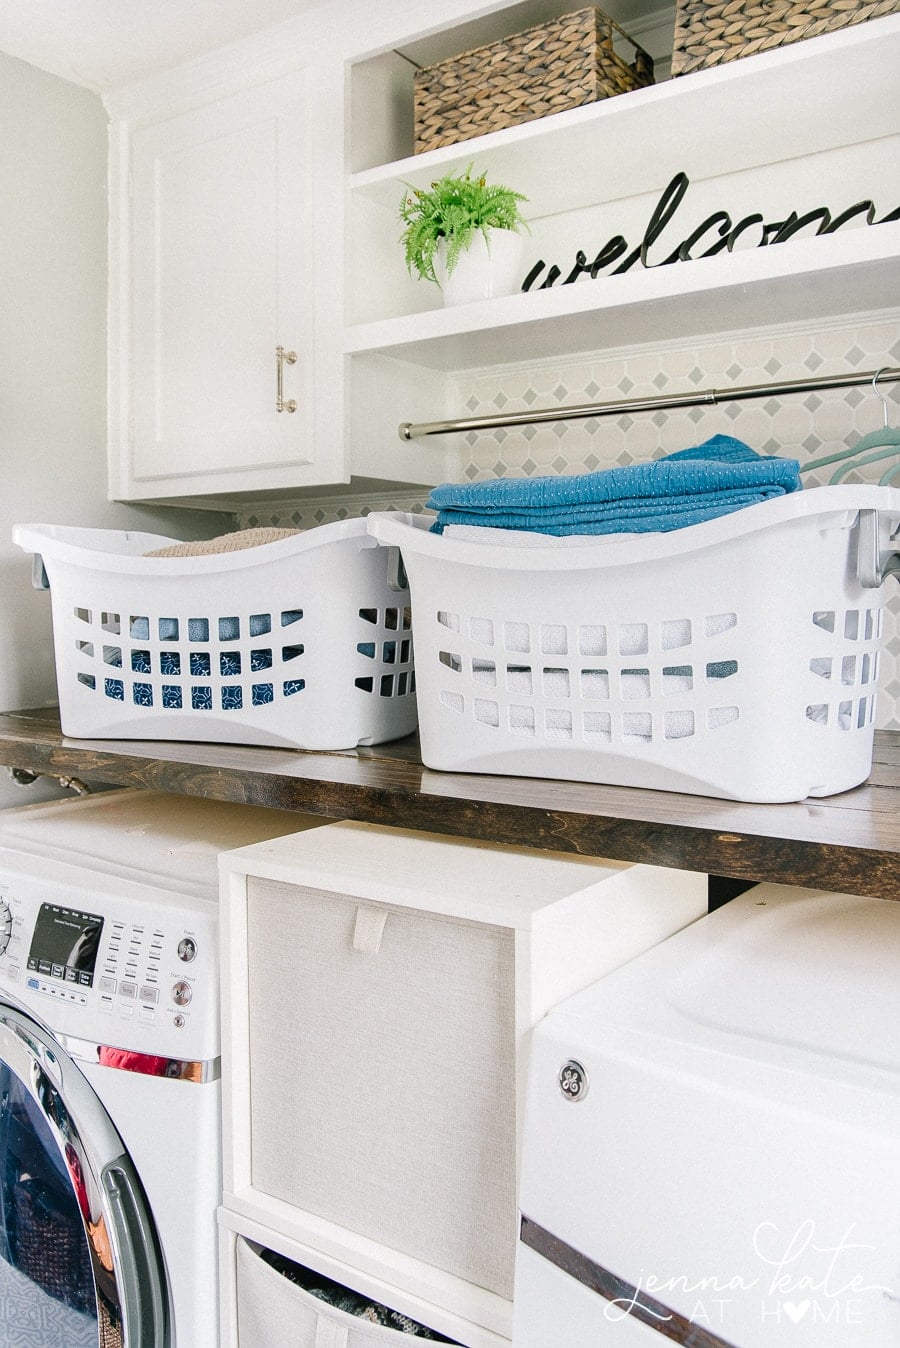 Two white laundry baskets sitting on a new shelf in the laundry room, above the washer and dryer.